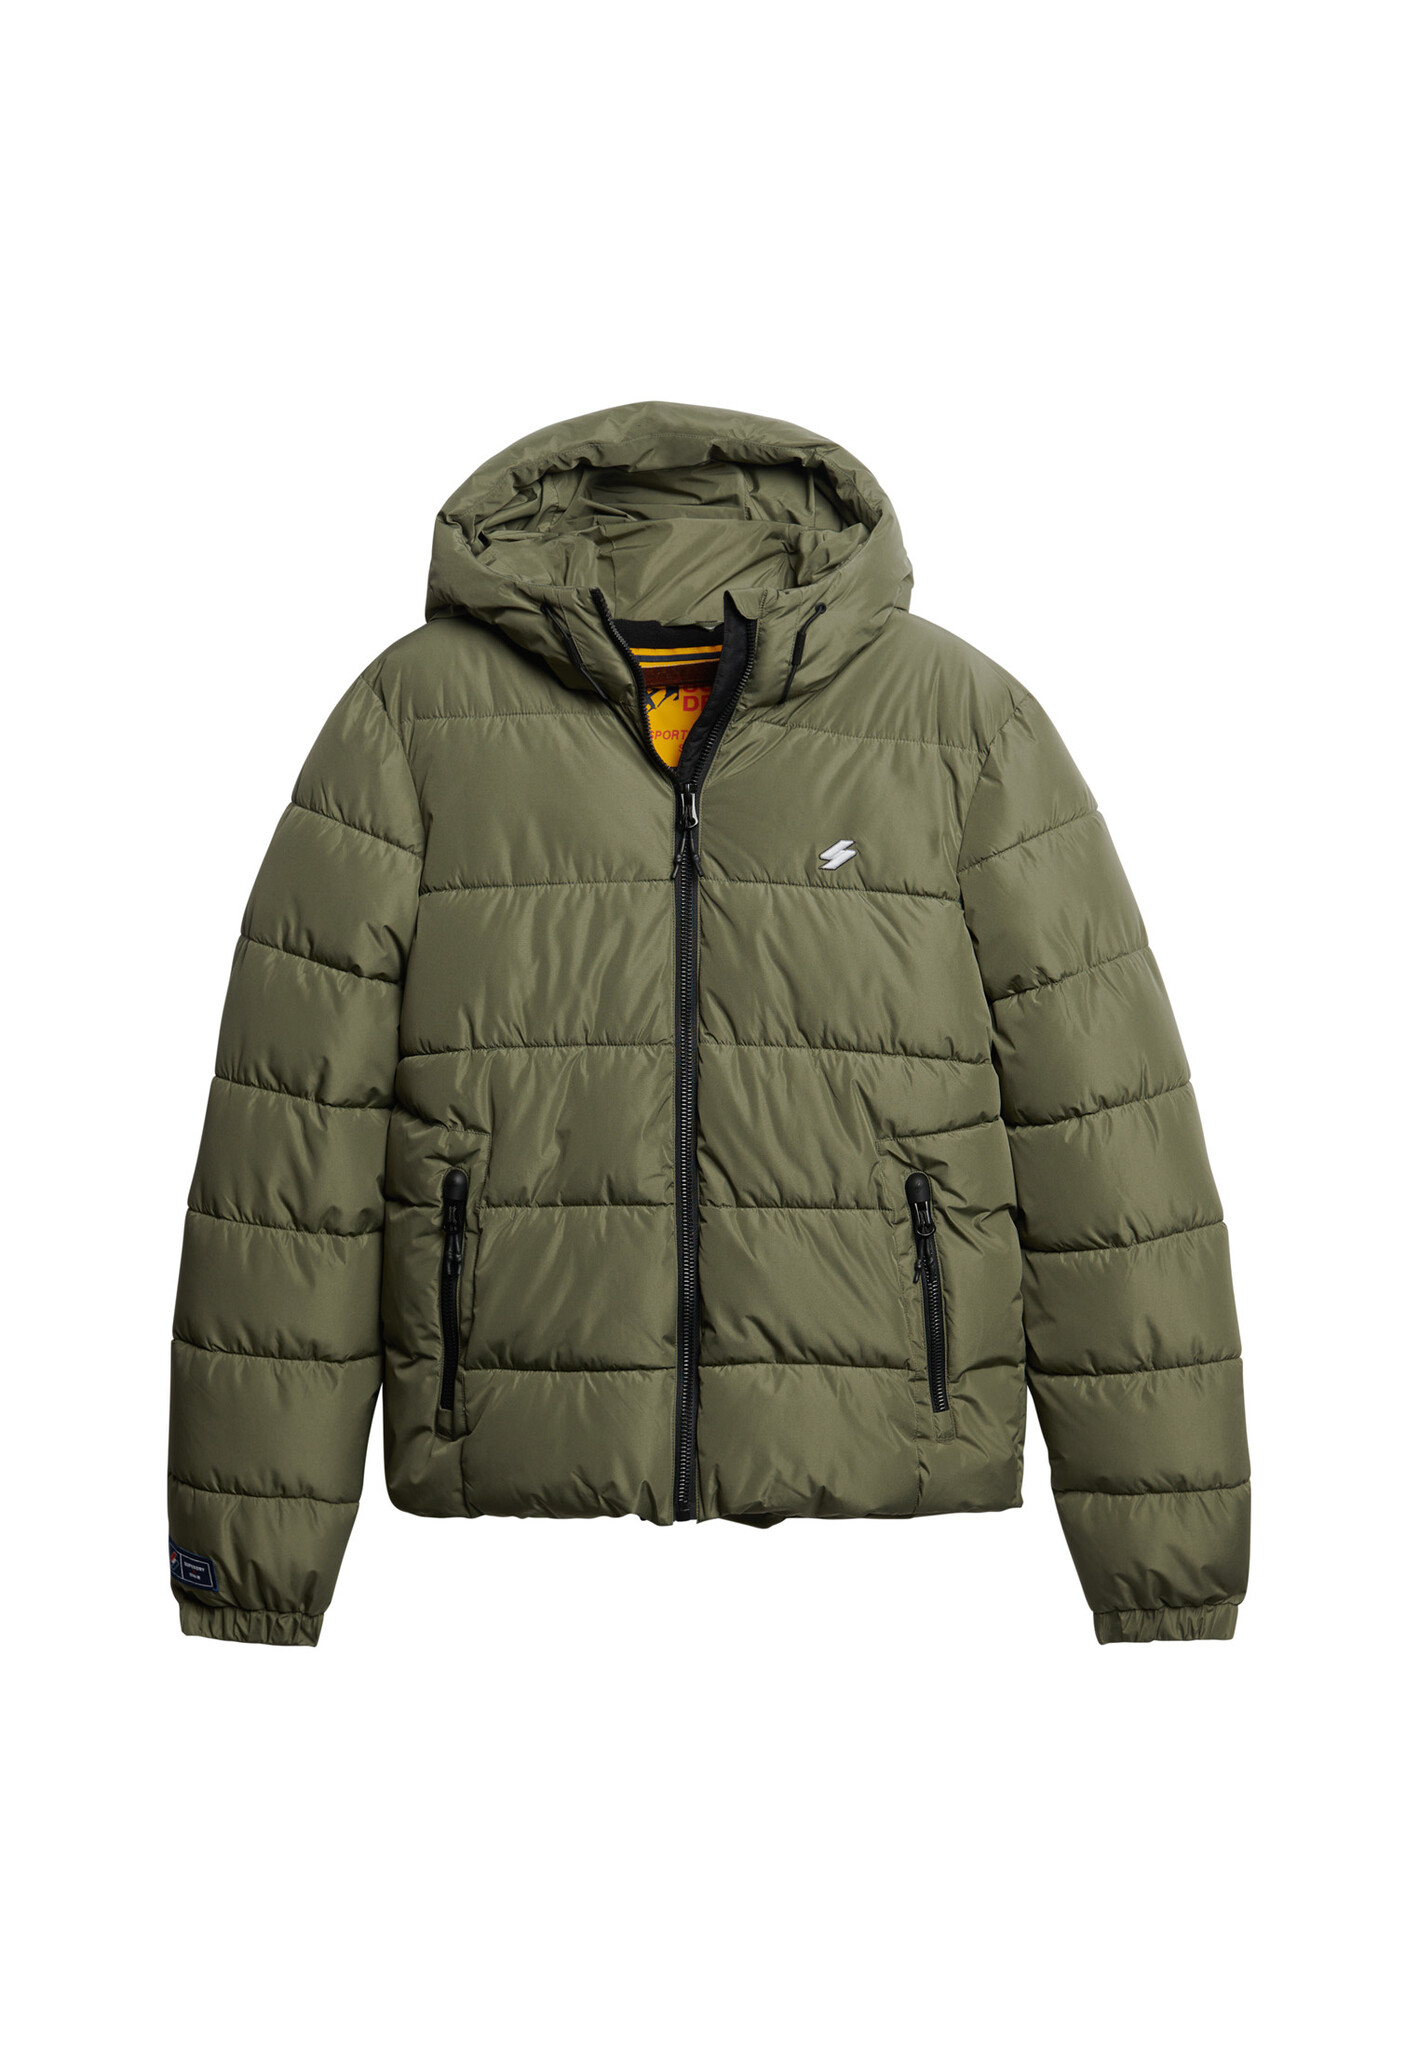 Superdry HOODED SPORTS PUFFR JACKET Dusty Olive Green   S product